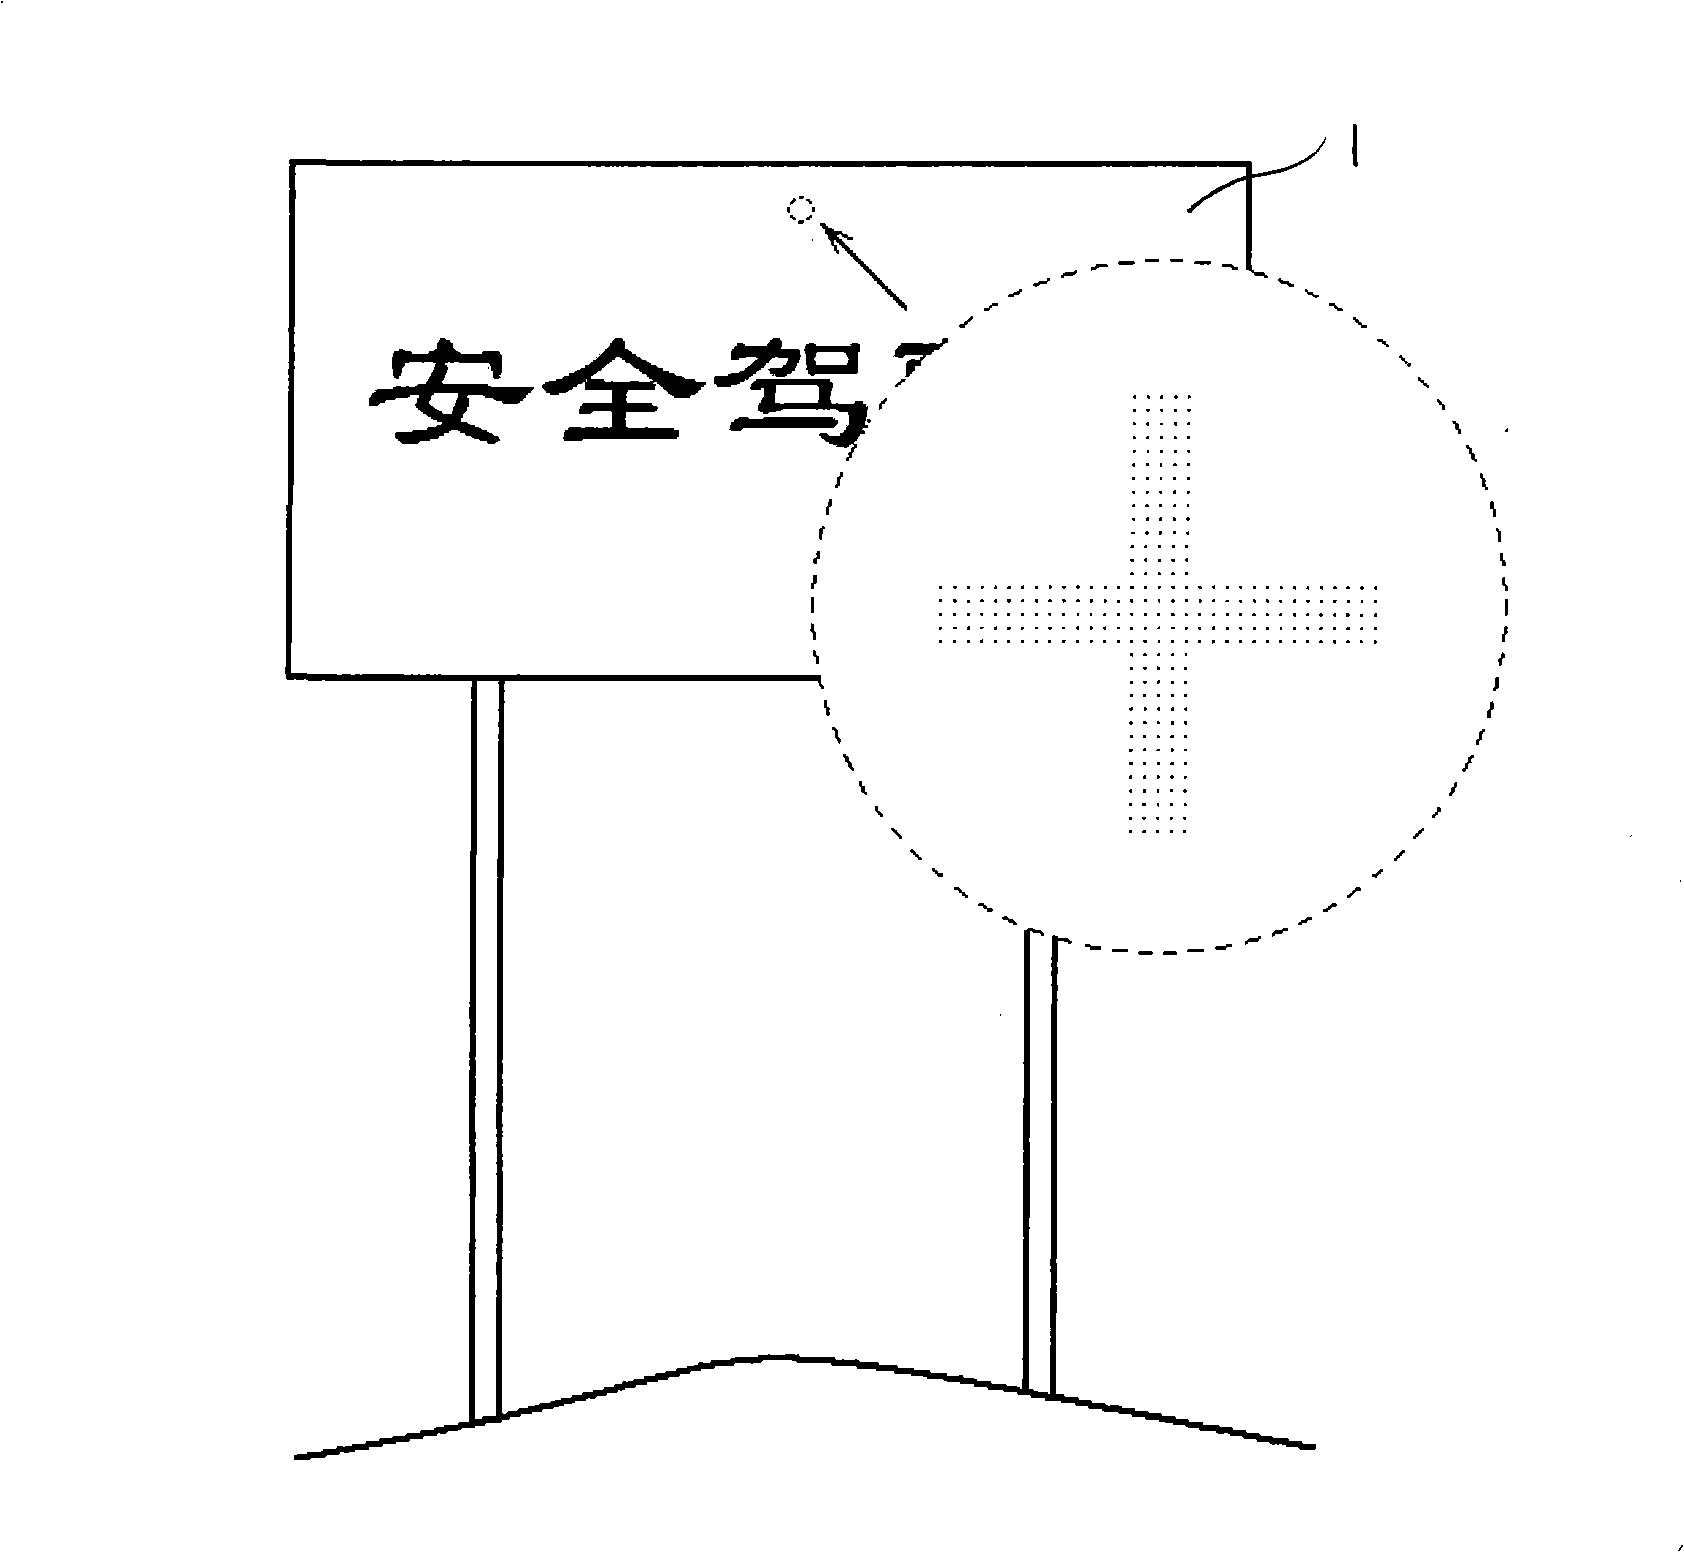 Advertisement placard with resonance acoustical absorption characteristic